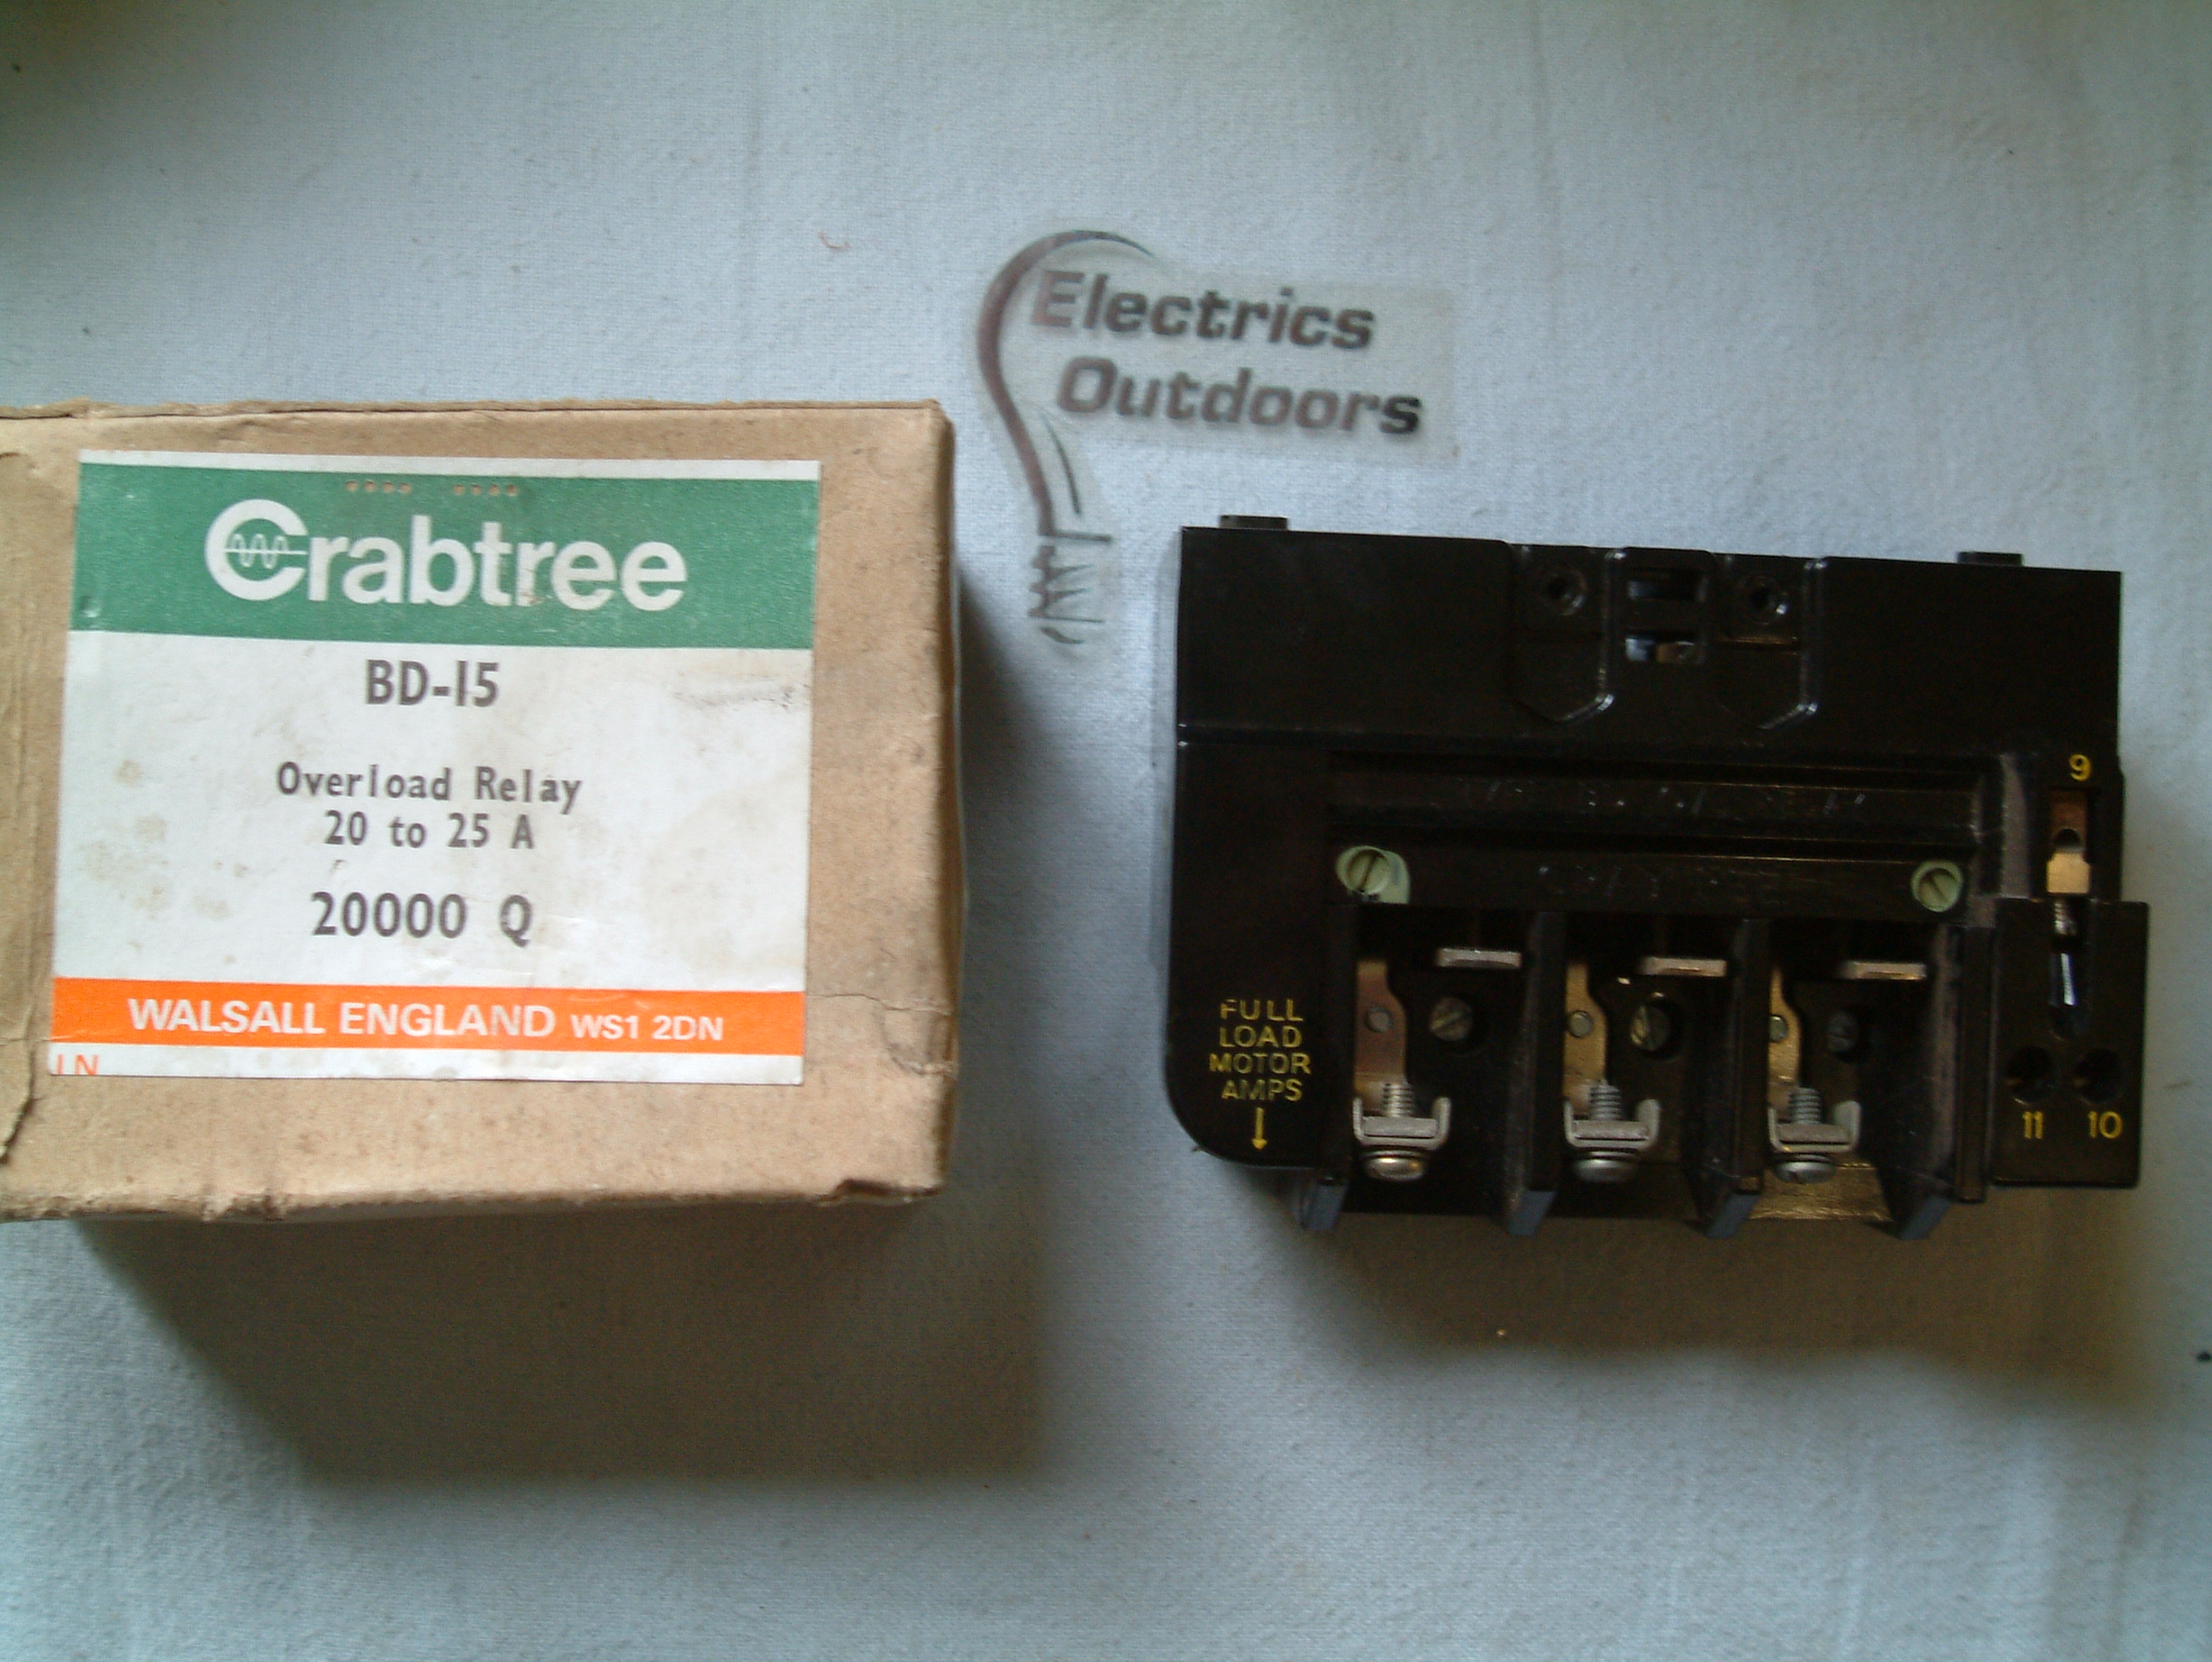 CRABTREE OVERLOAD RELAY 20 TO 25 AMP 20000 Q BD-15